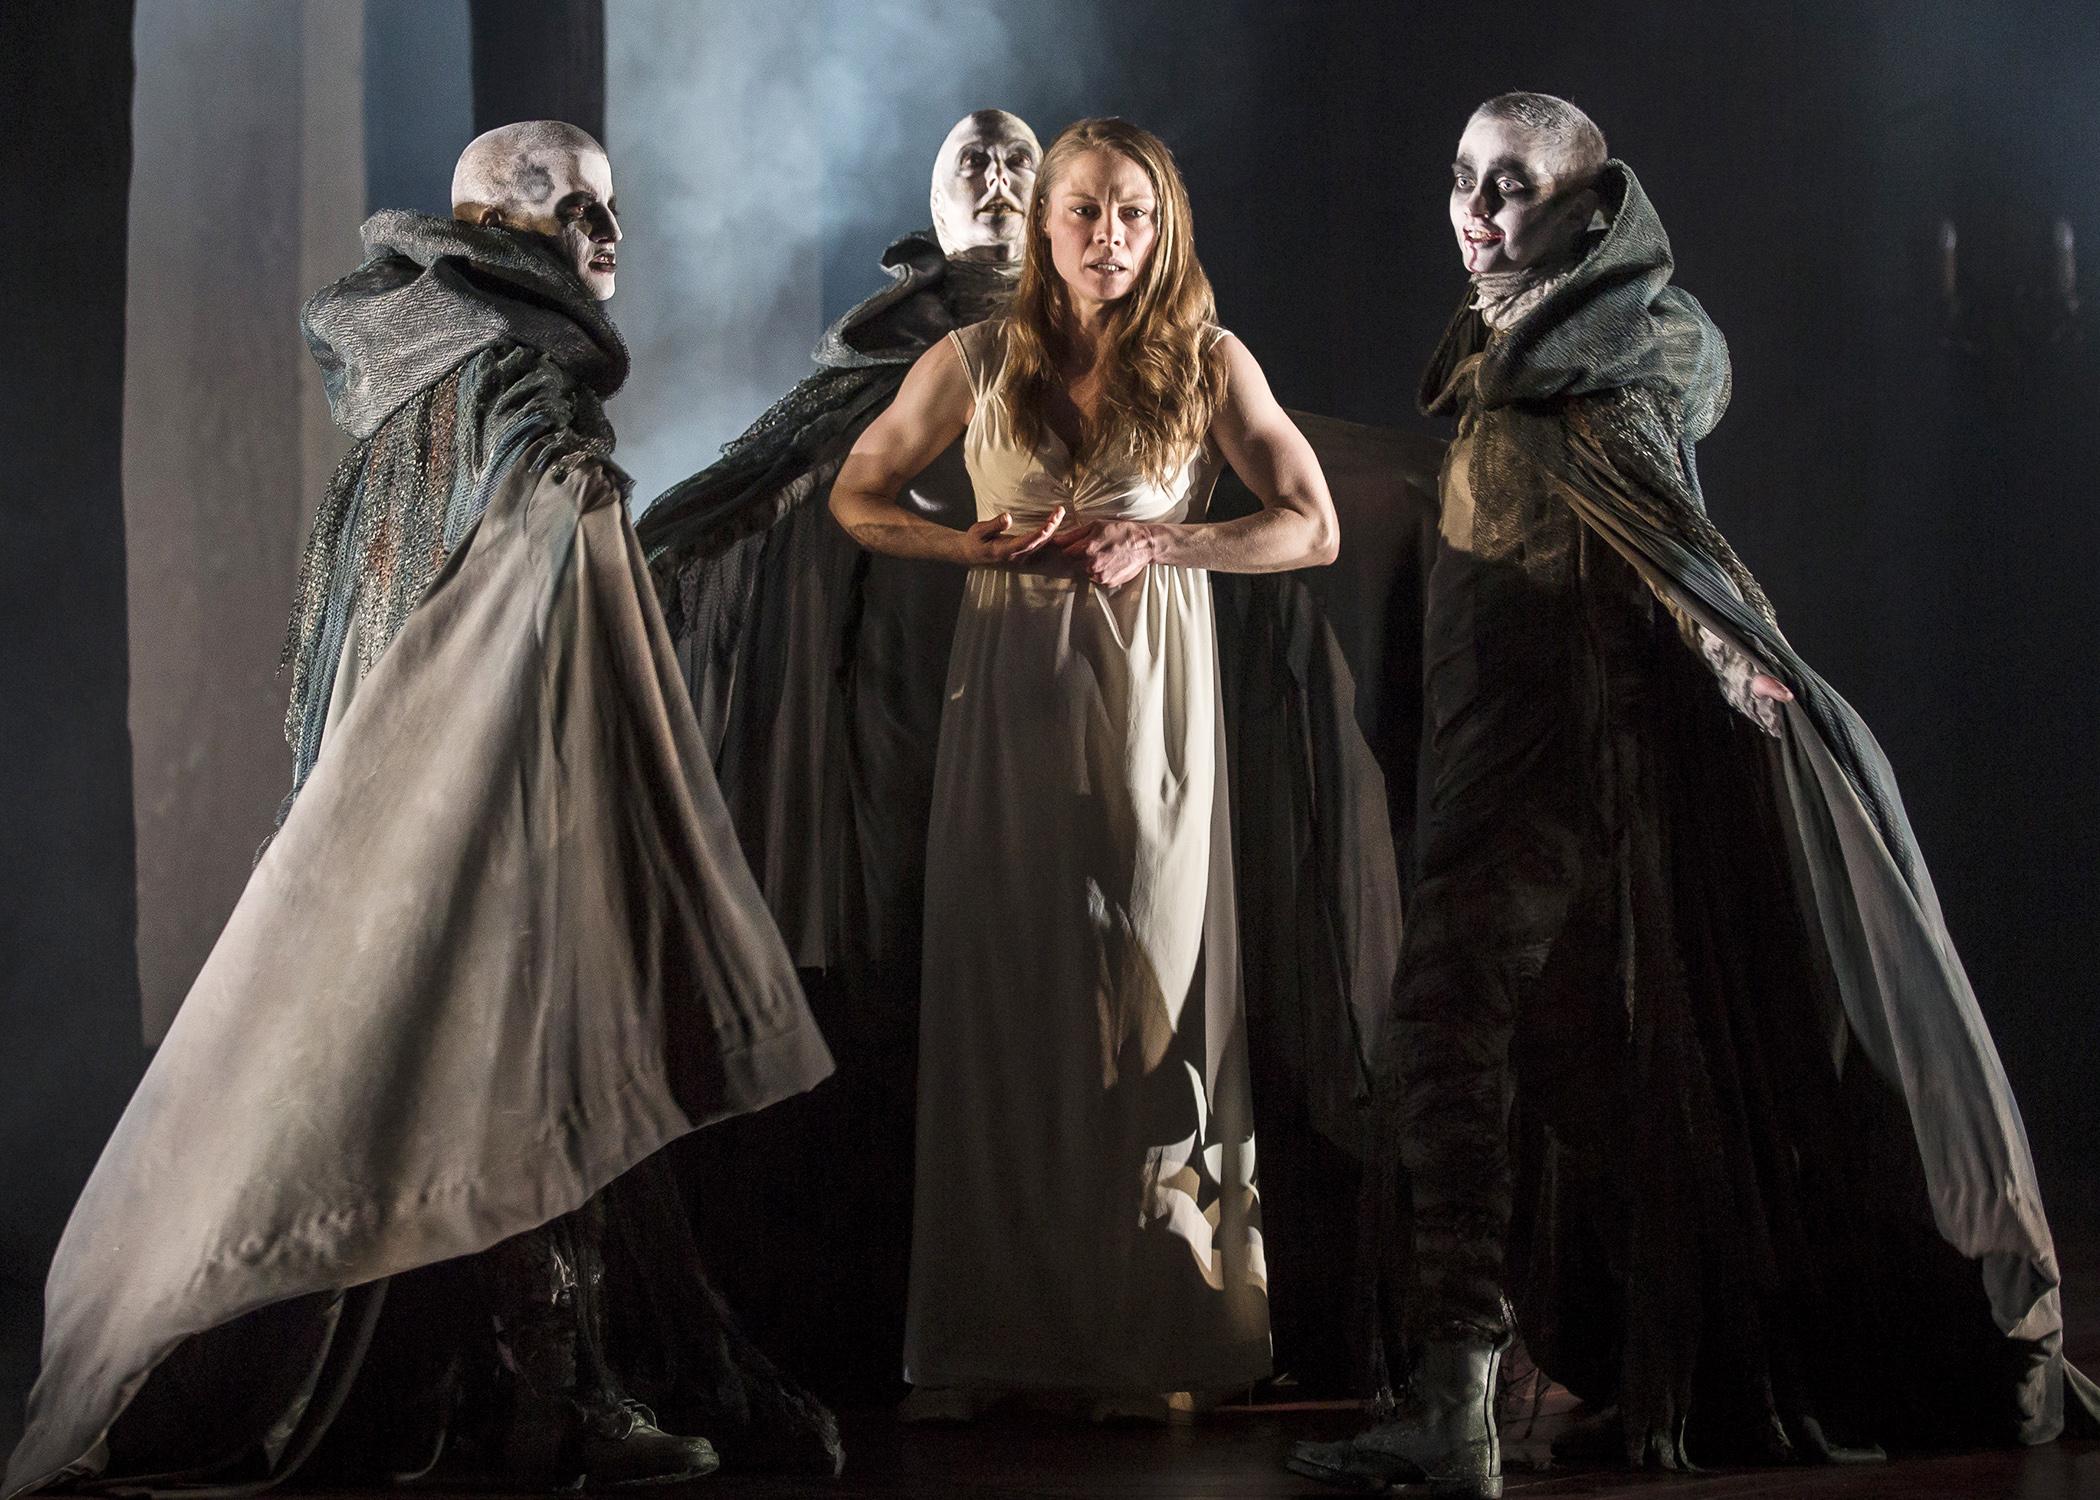 Lady Macbeth (Chaon Cross) is taunted by the unseen Weird Sisters in Chicago Shakespeare Theater’s production of “Macbeth.” (Photo by Liz Lauren)